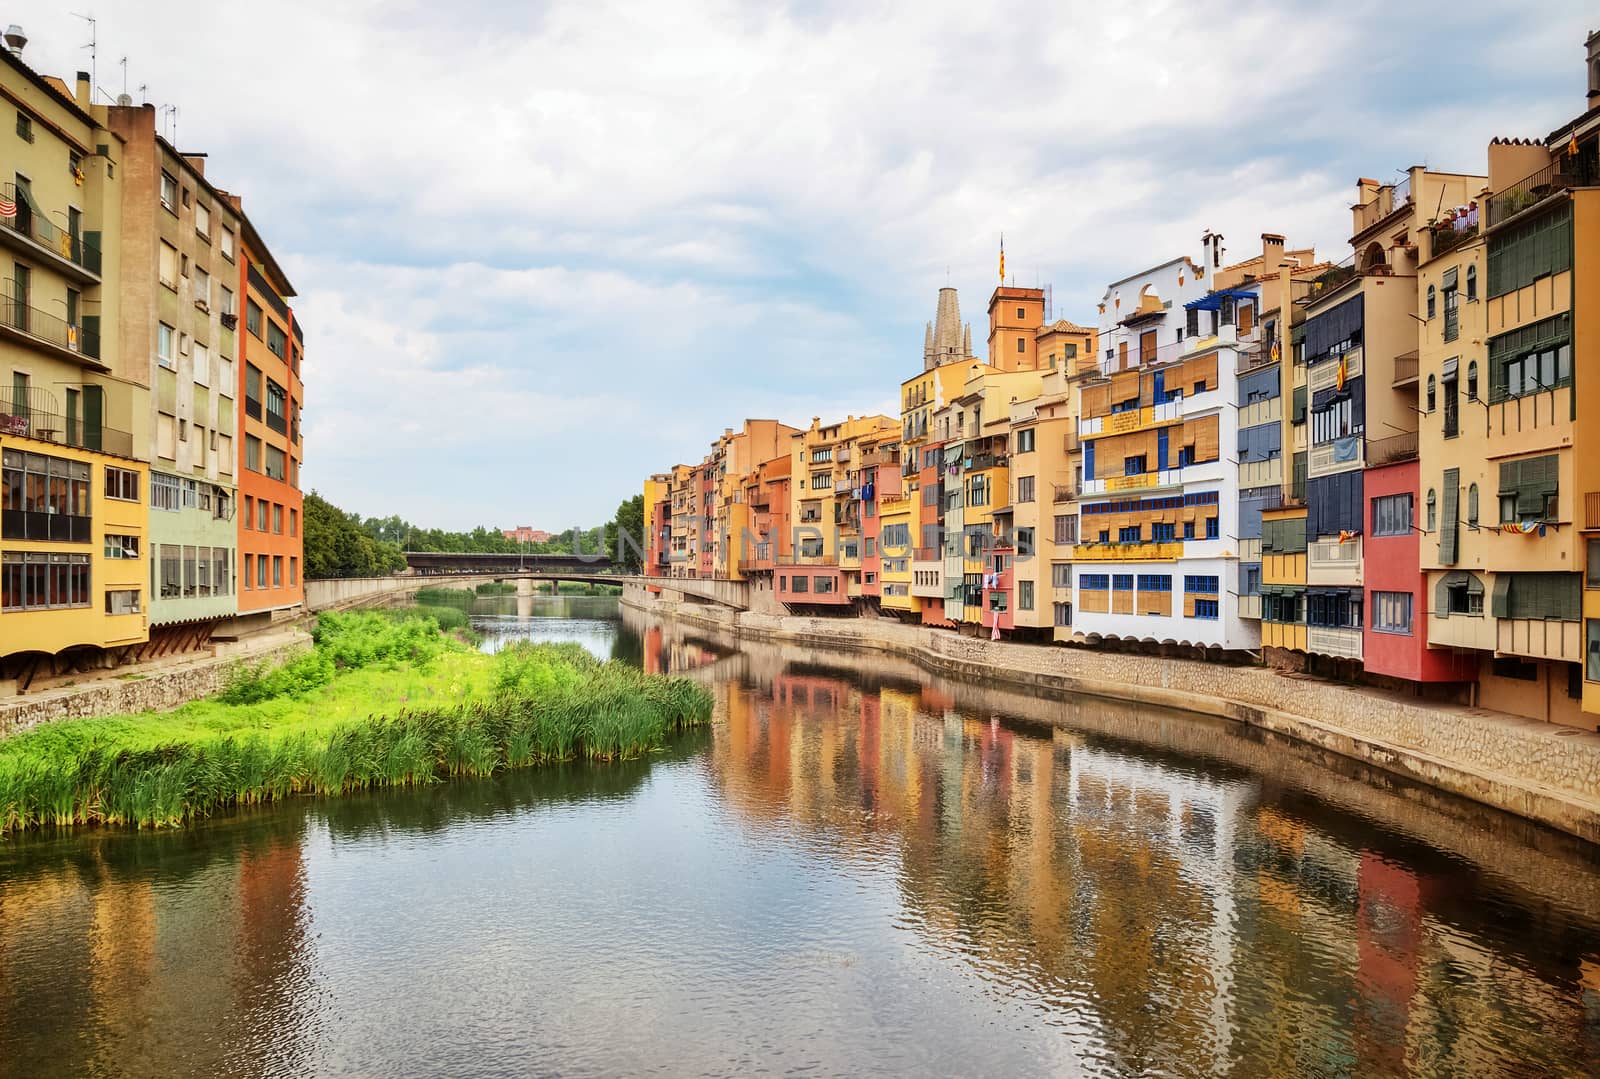 River and picturesque buildings of Girona. Catalonia, Spain.